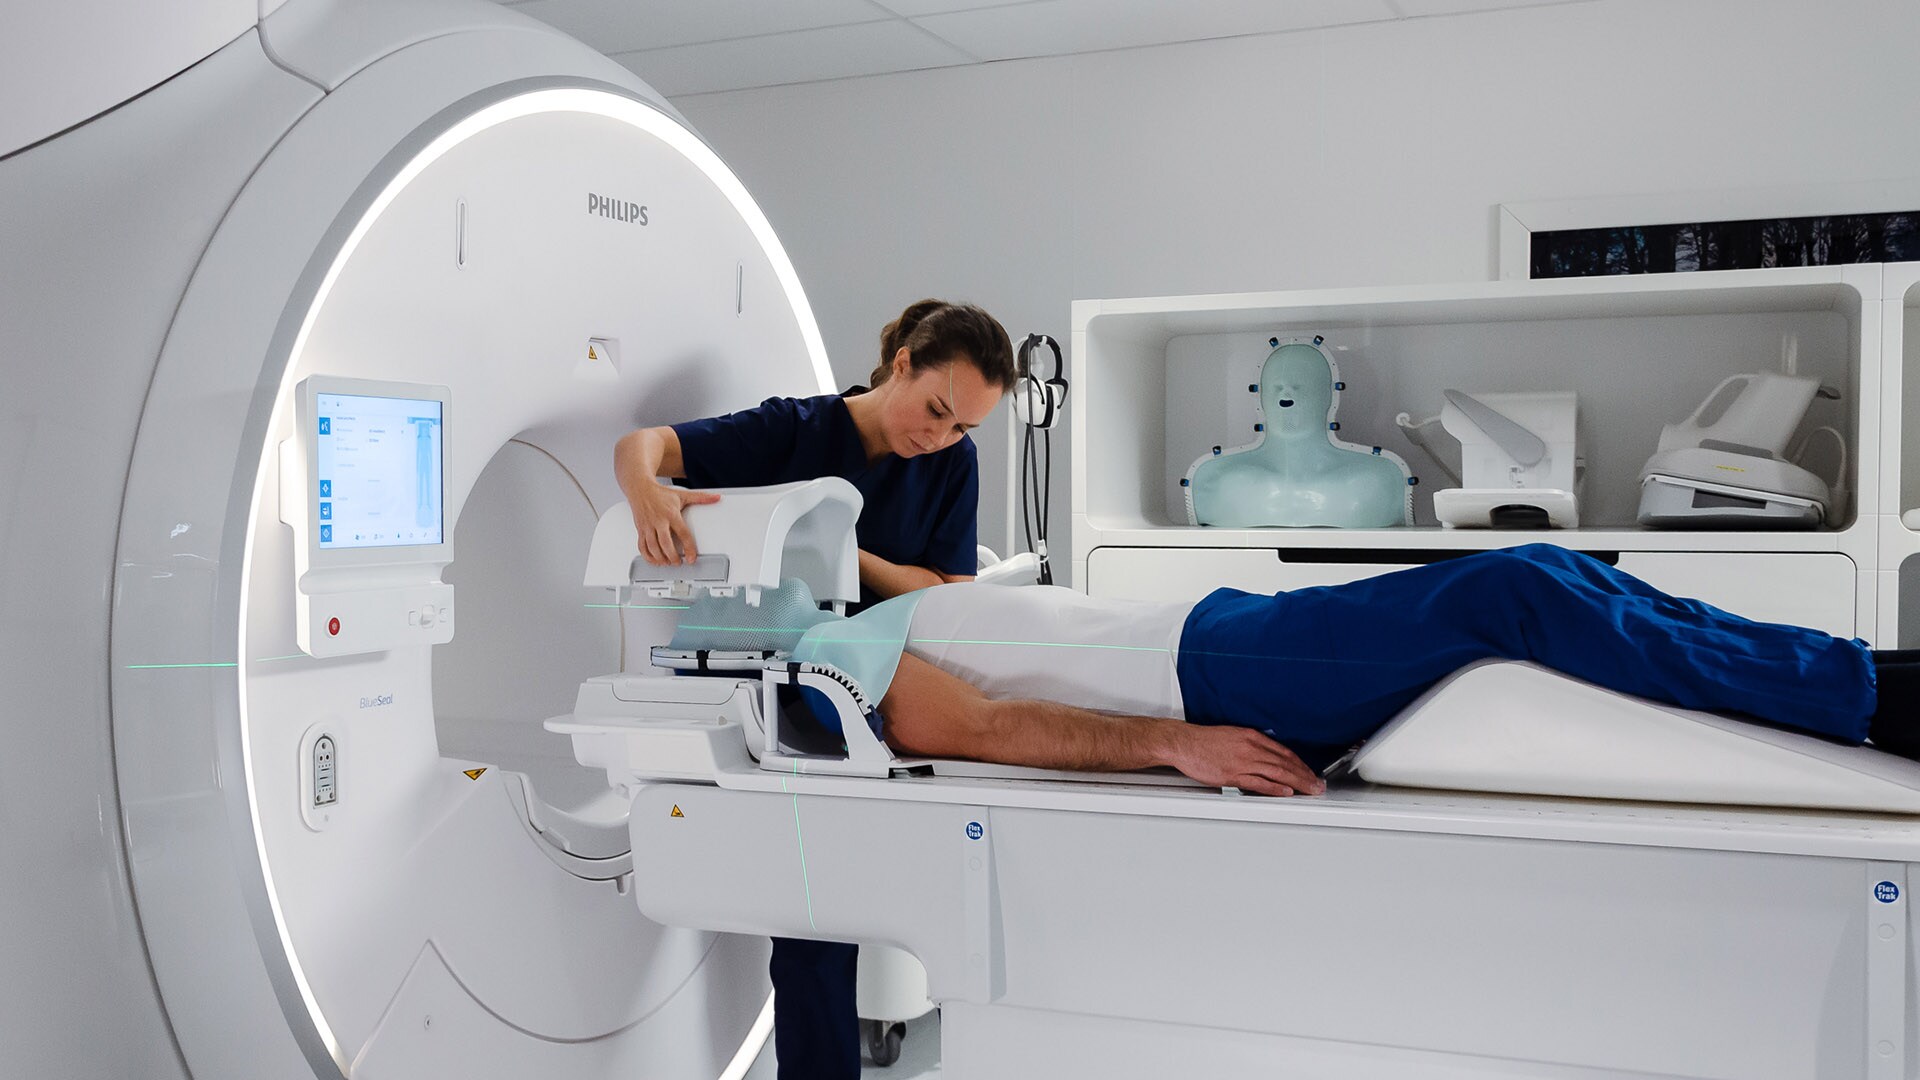 Philips advances MR radiotherapy imaging and simulation for head and neck cancers